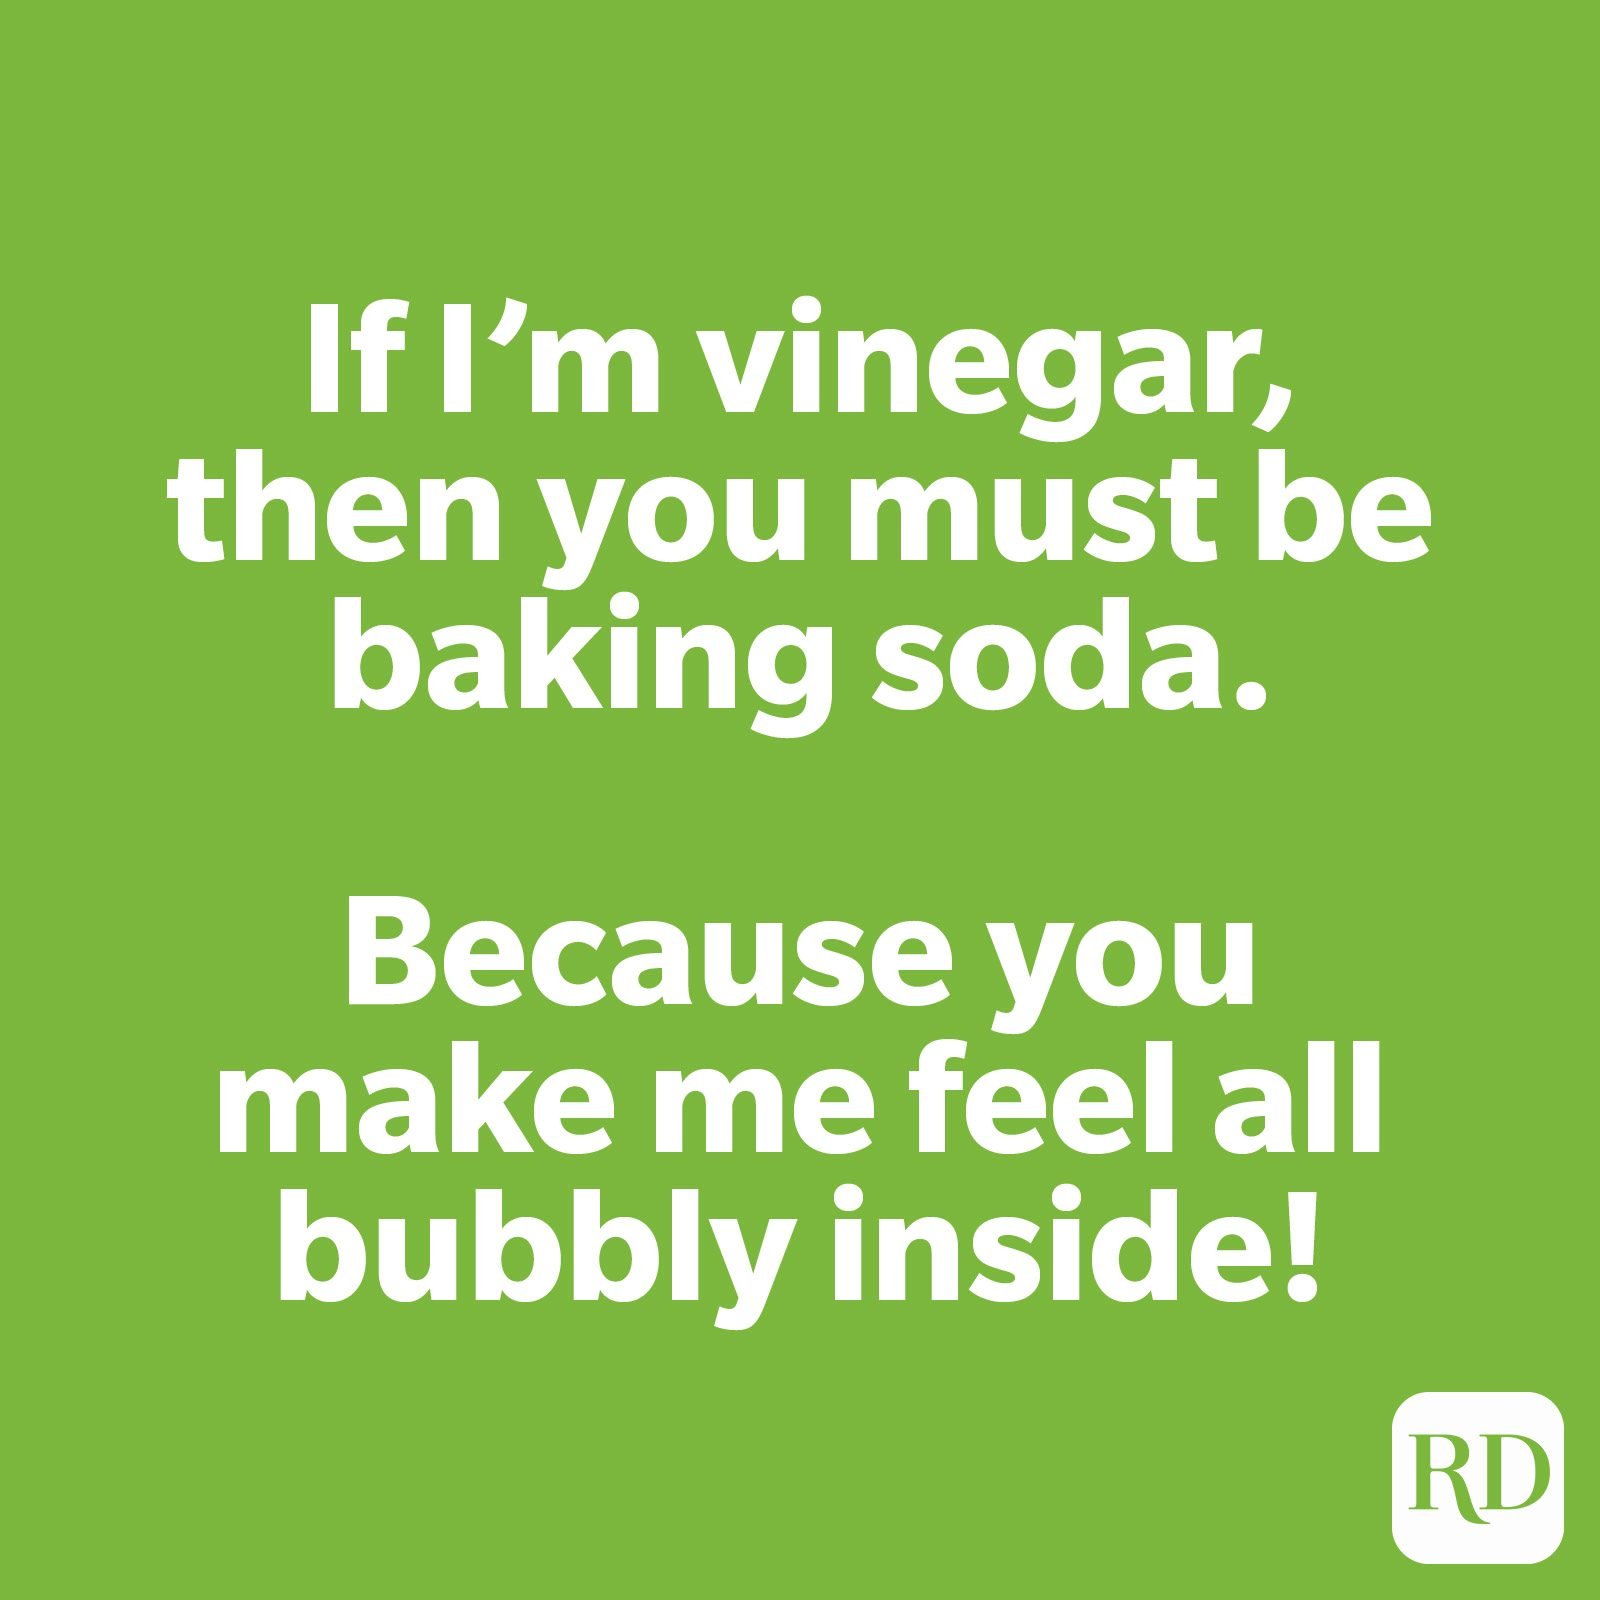 If I'm vinegar, then you must be baking soda. Because you make me feel all bubbly inside!